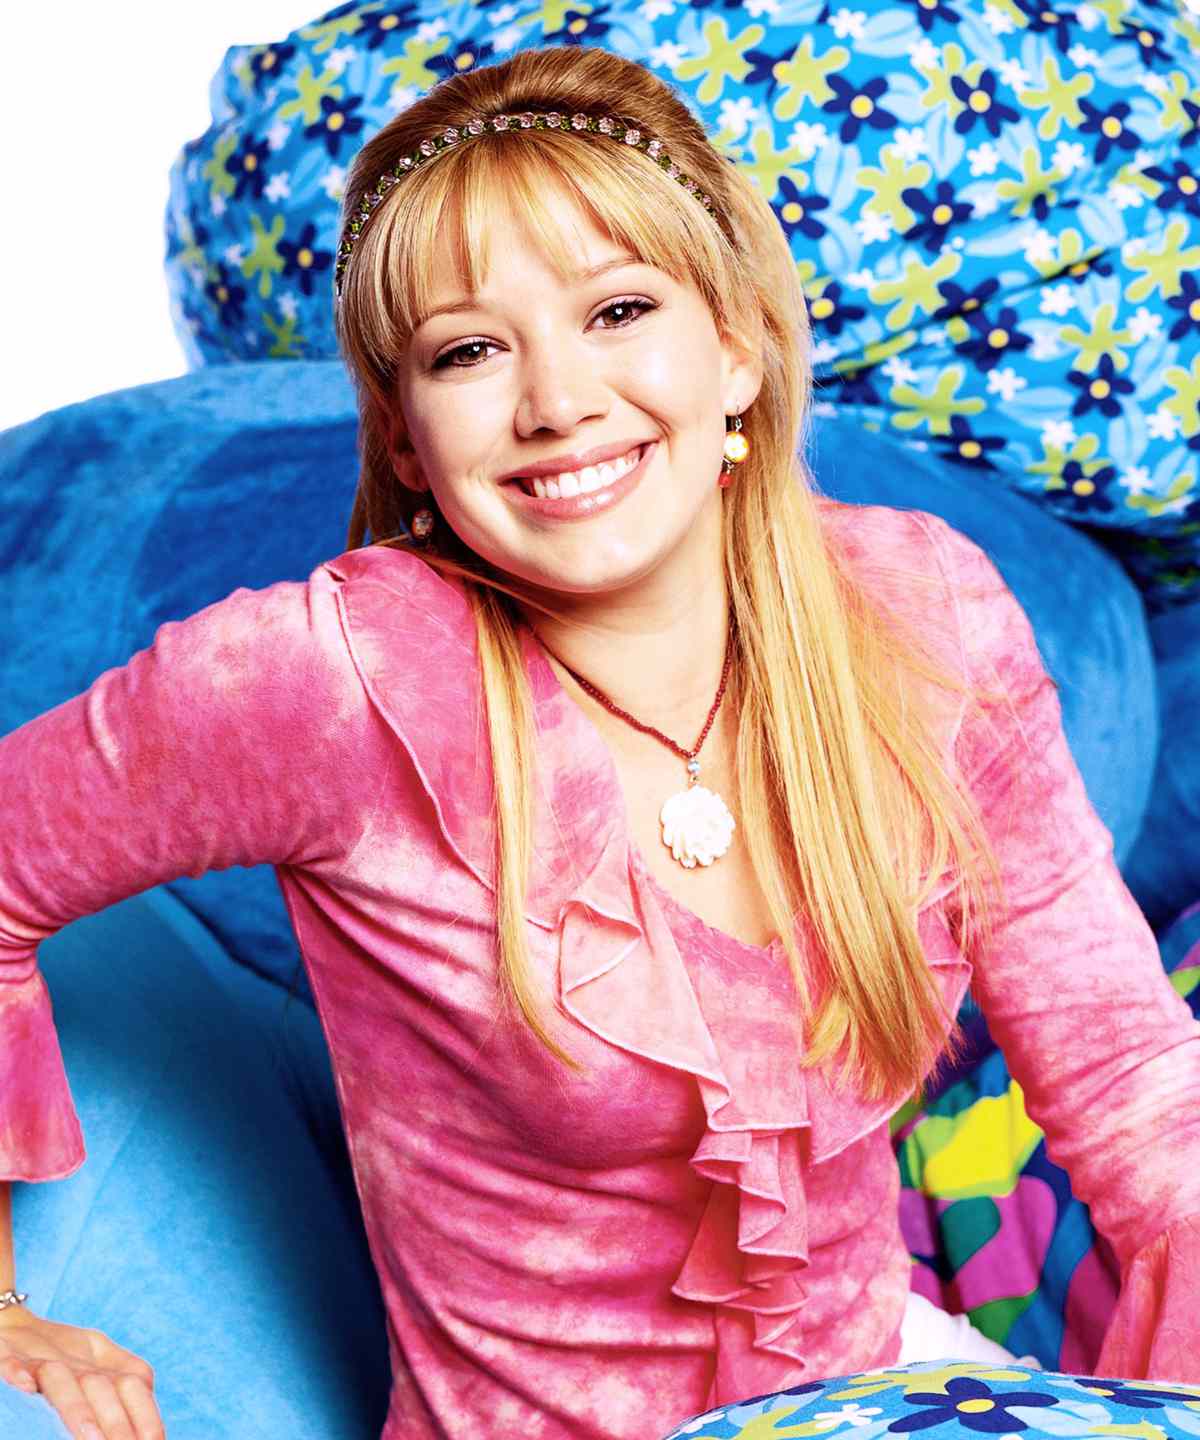 Hillary Duff as Lizzie McGuire - Lead 2016